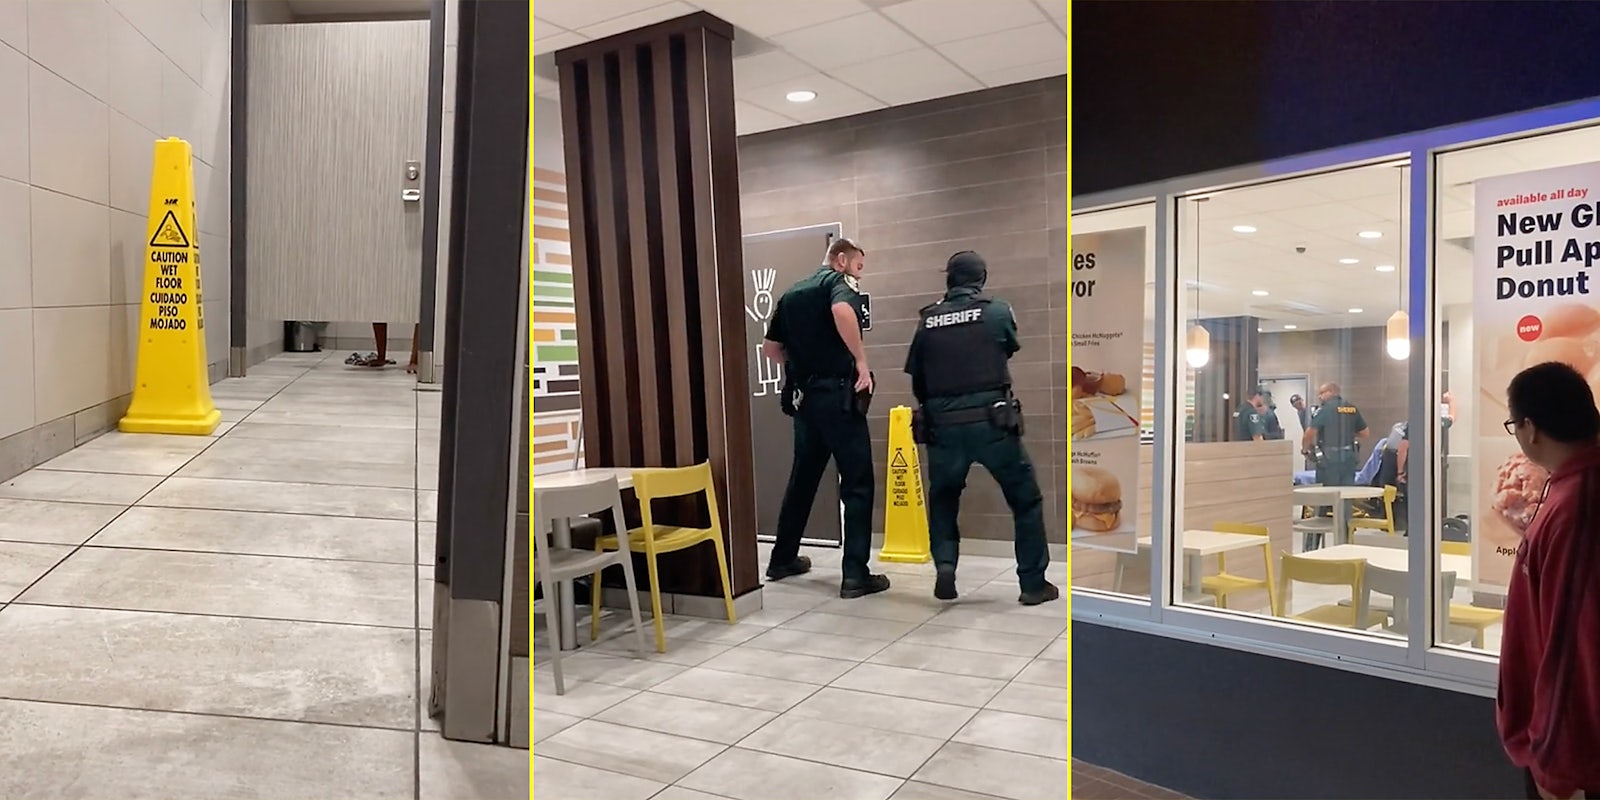 A man in a bathroom stall (L), cops outside a bathroom (C), and people looking into a McDonald's restaurant (R).